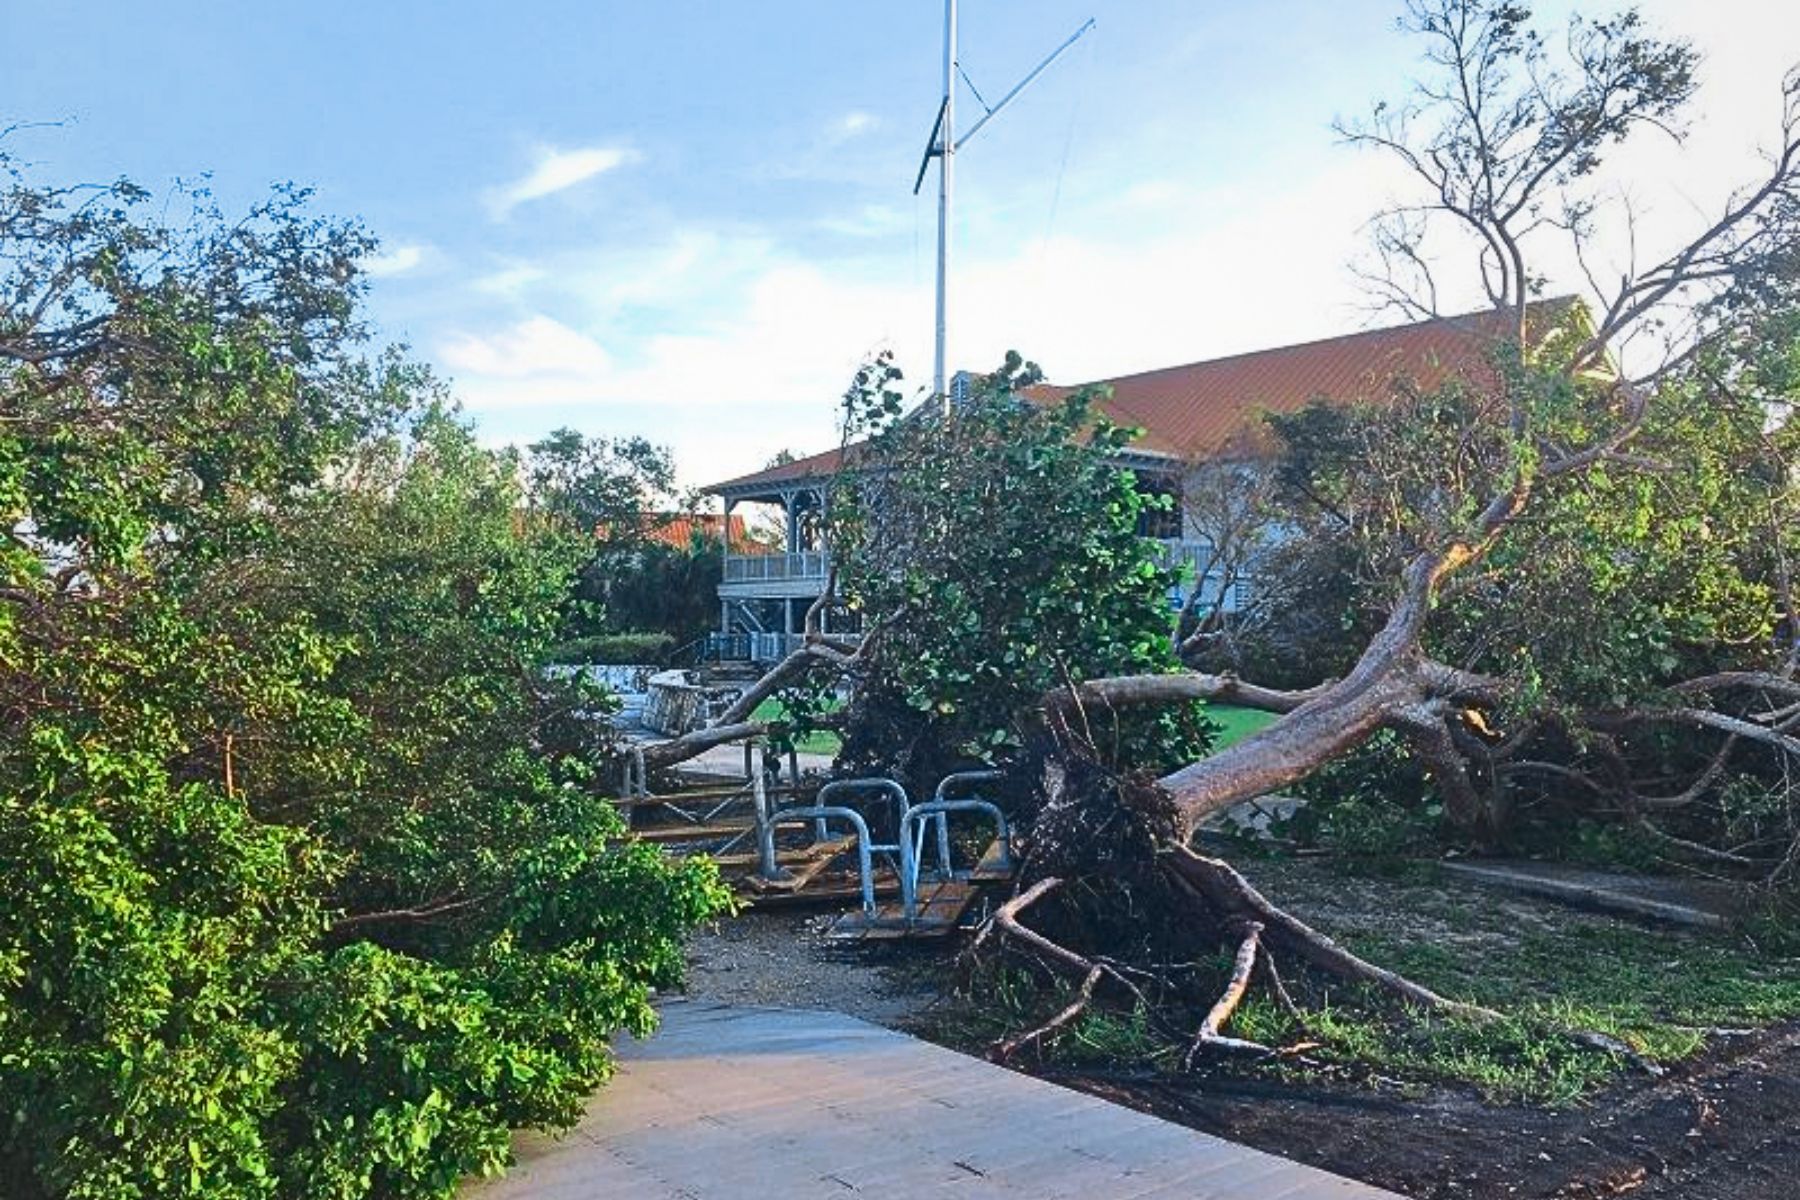 Downed trees on a pathway in Biscayne National Park after Hurricane Irma in 2017.